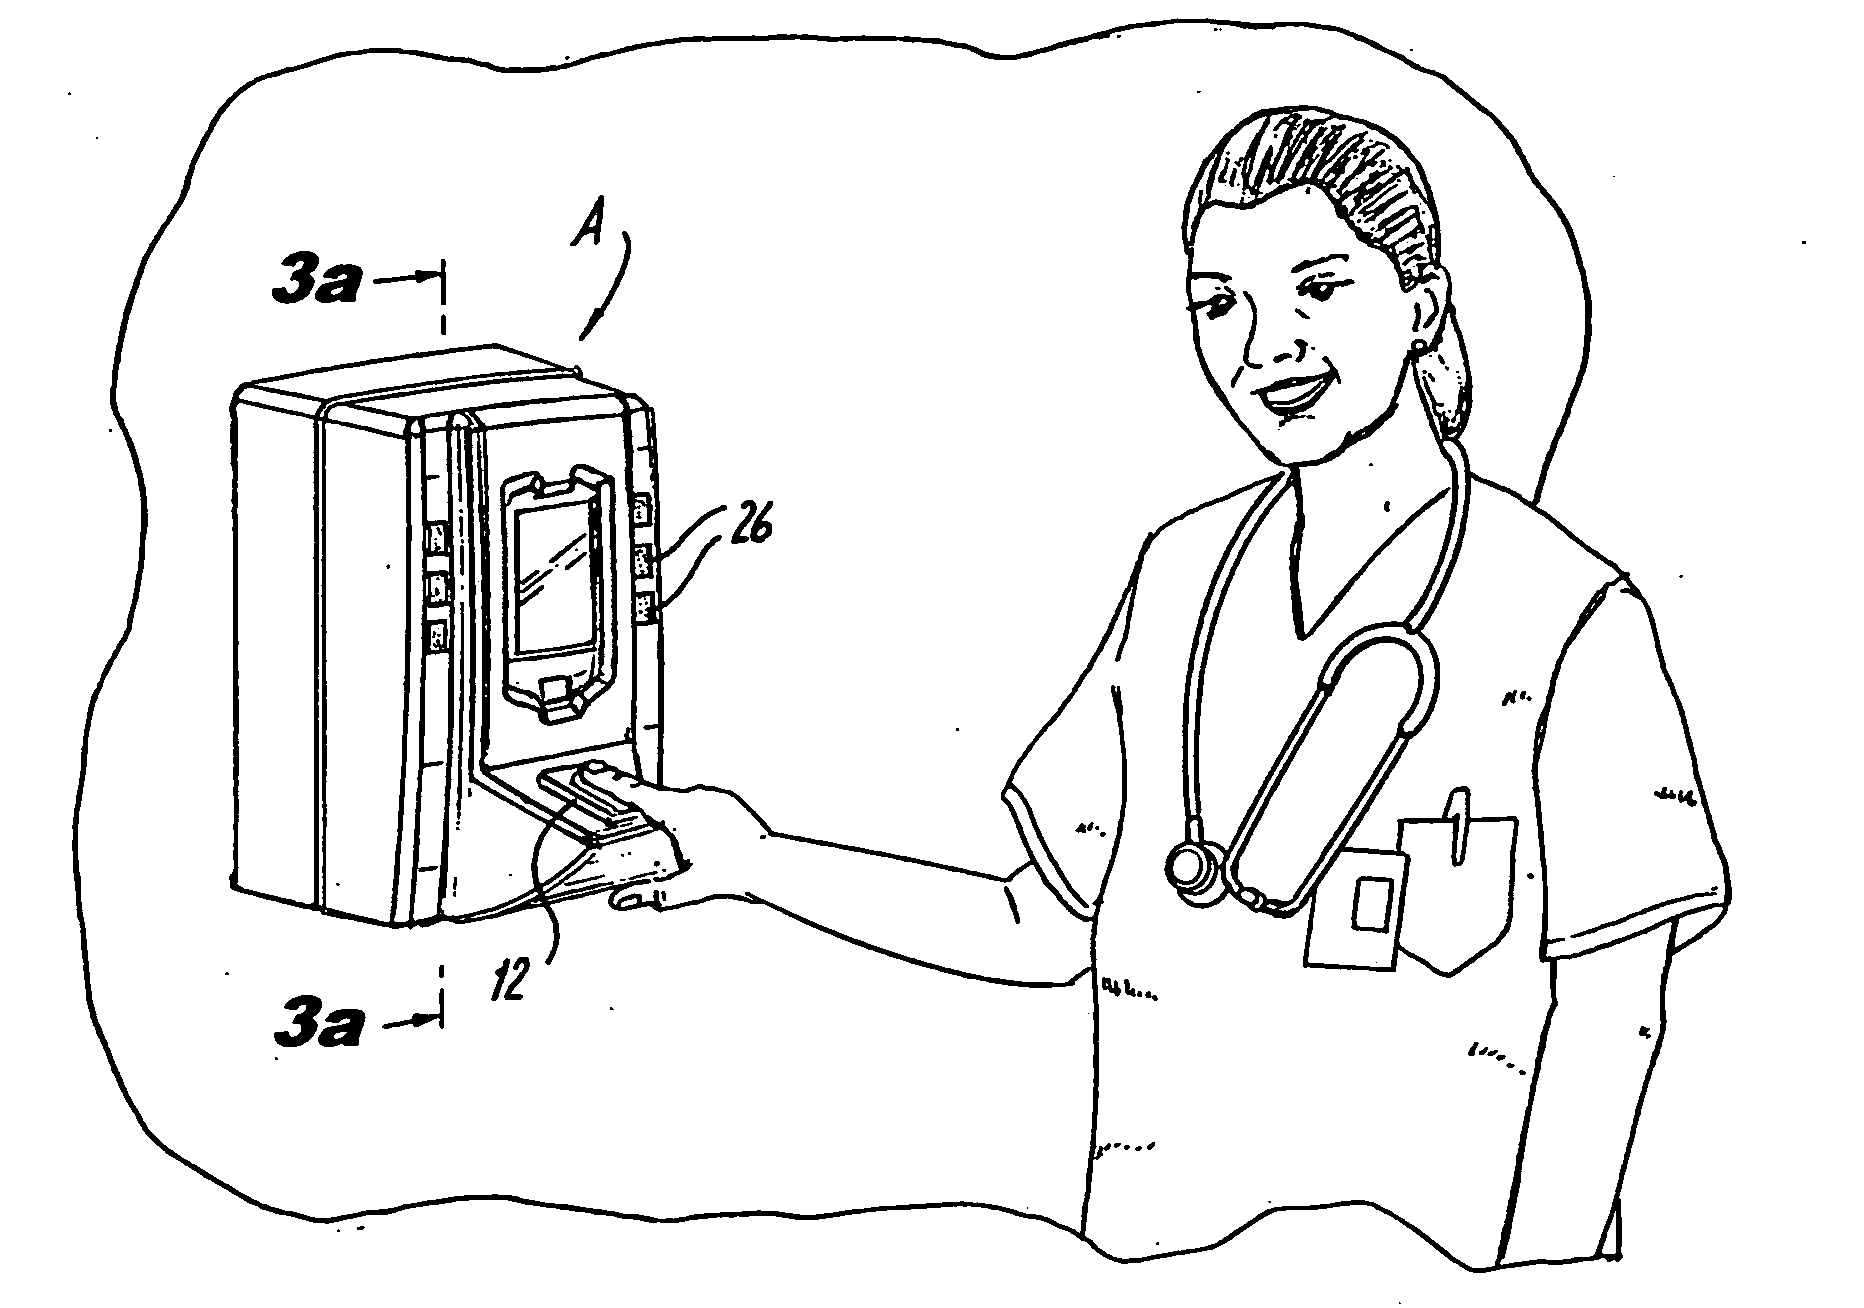 System for tracking hand washing and other tasks